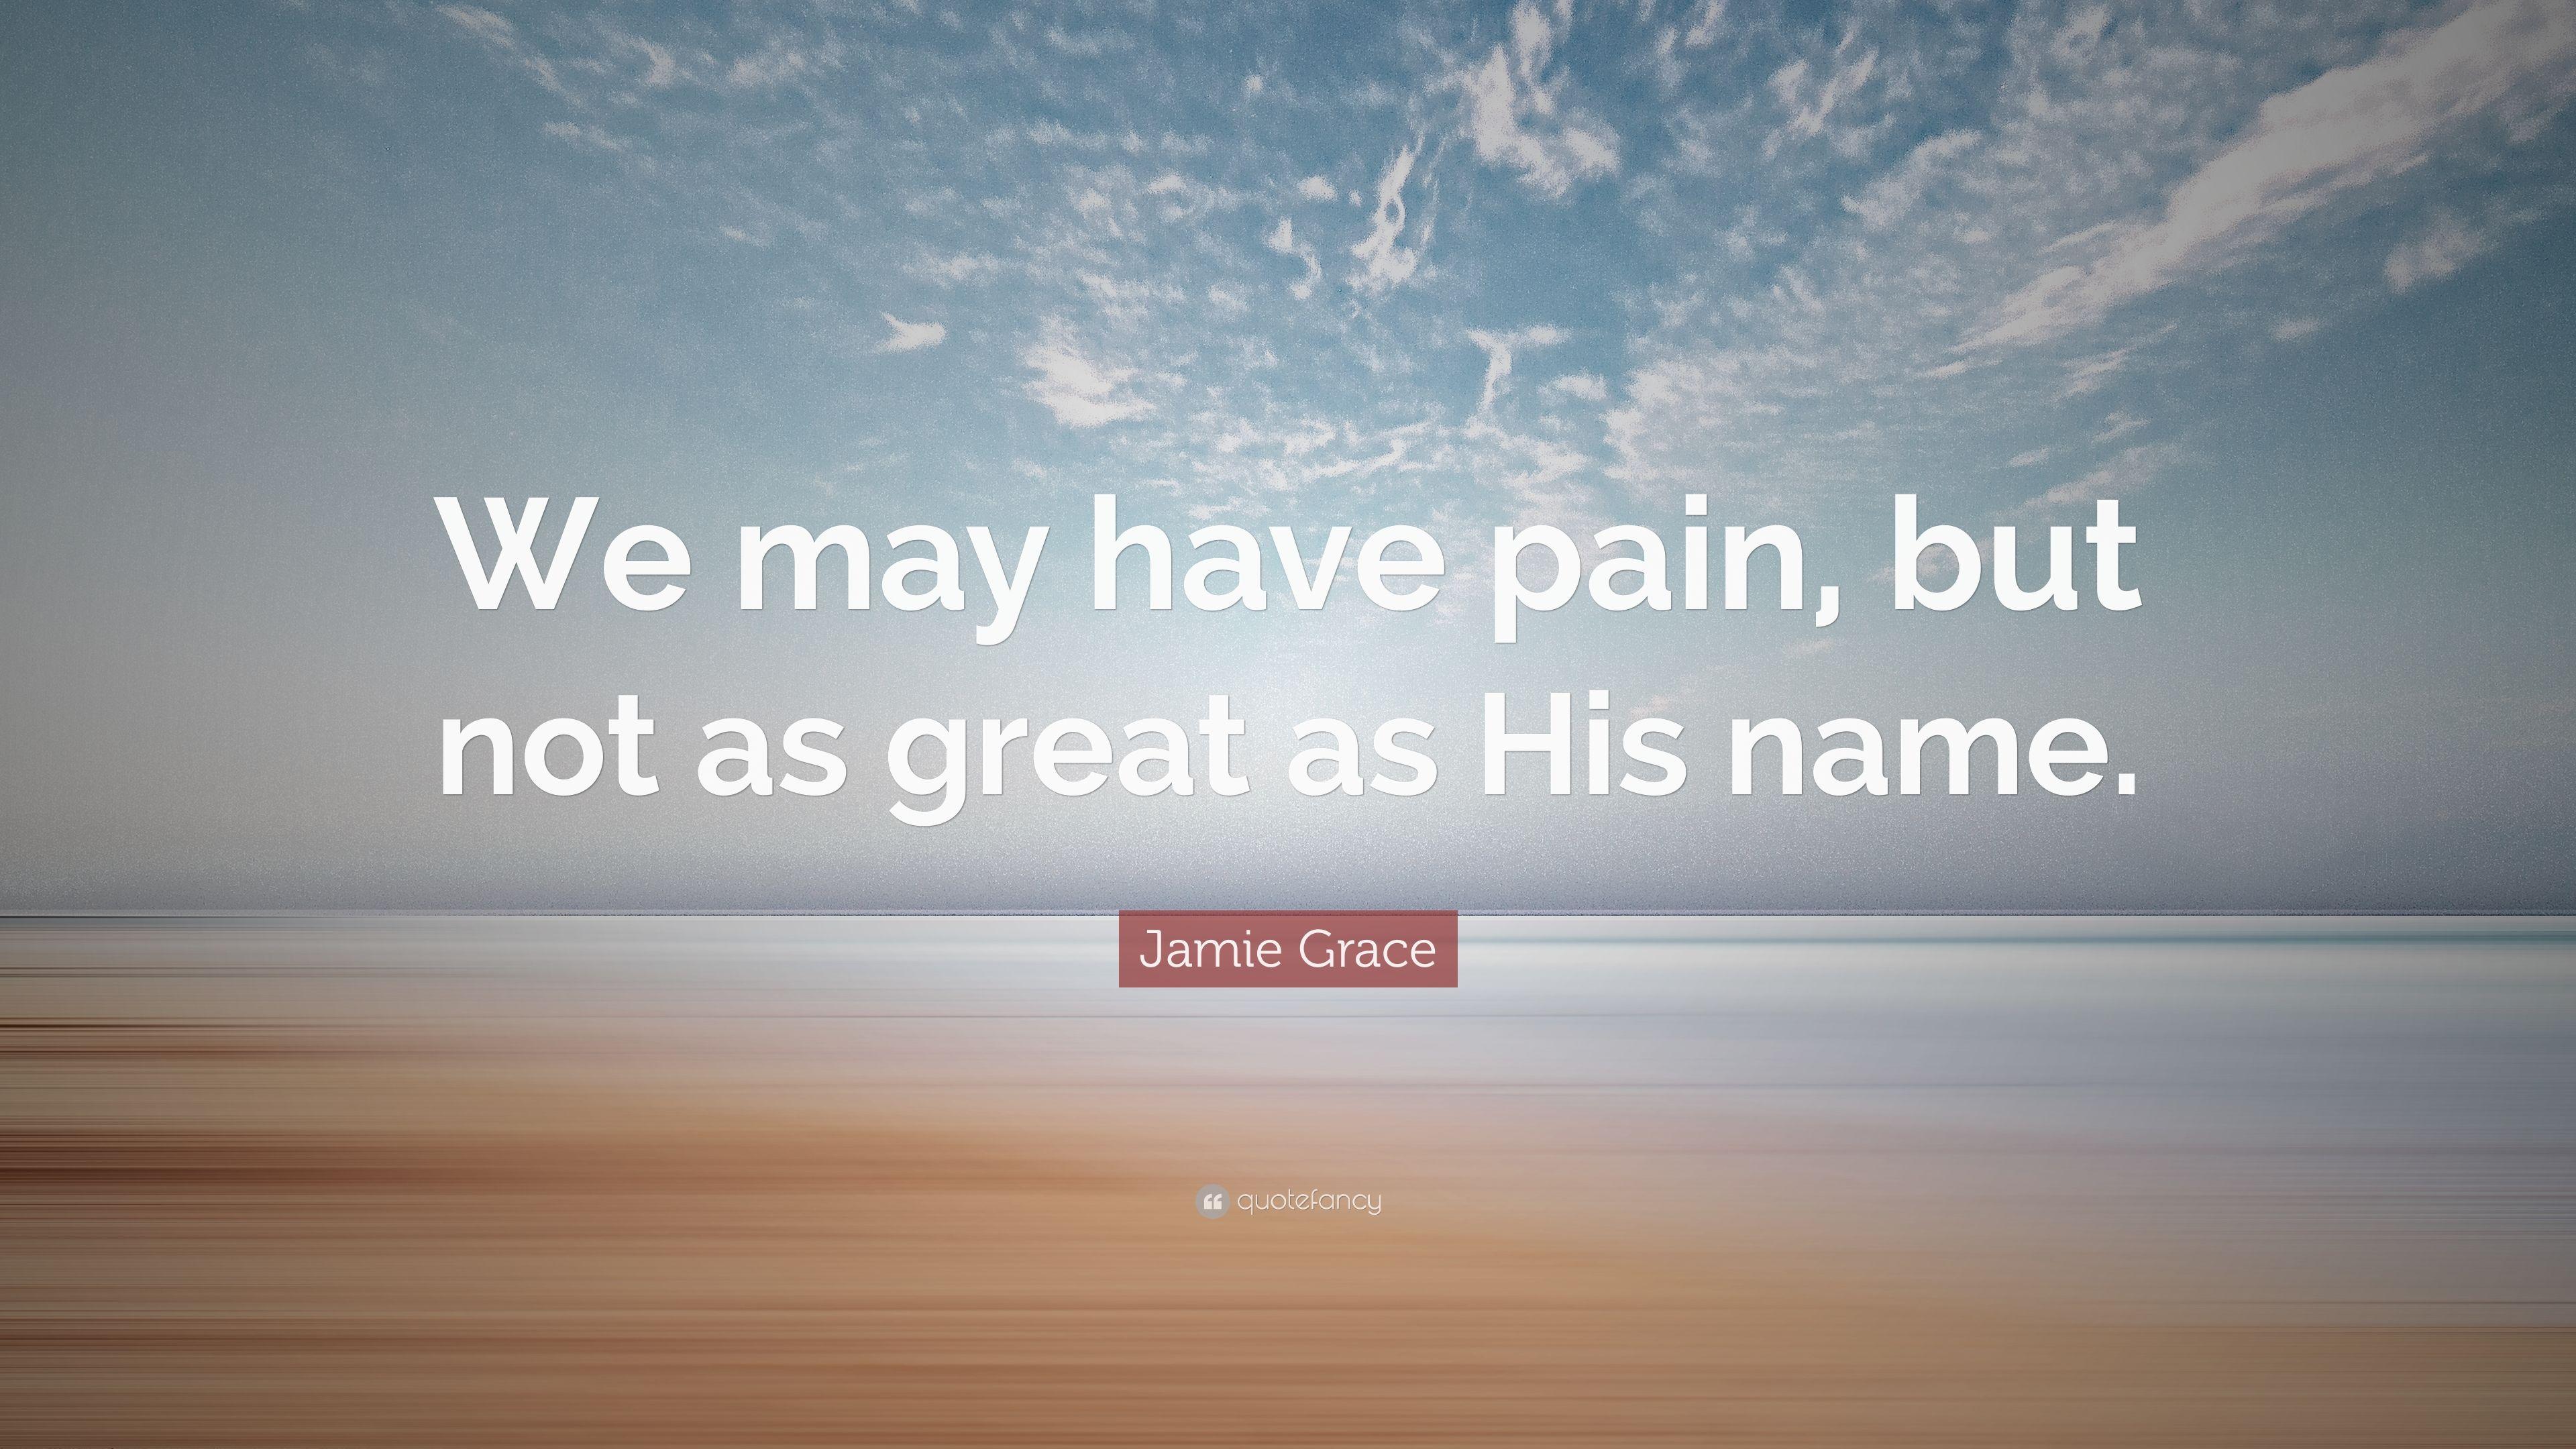 Jamie Grace Quote: “We may have pain, but not as great as His name